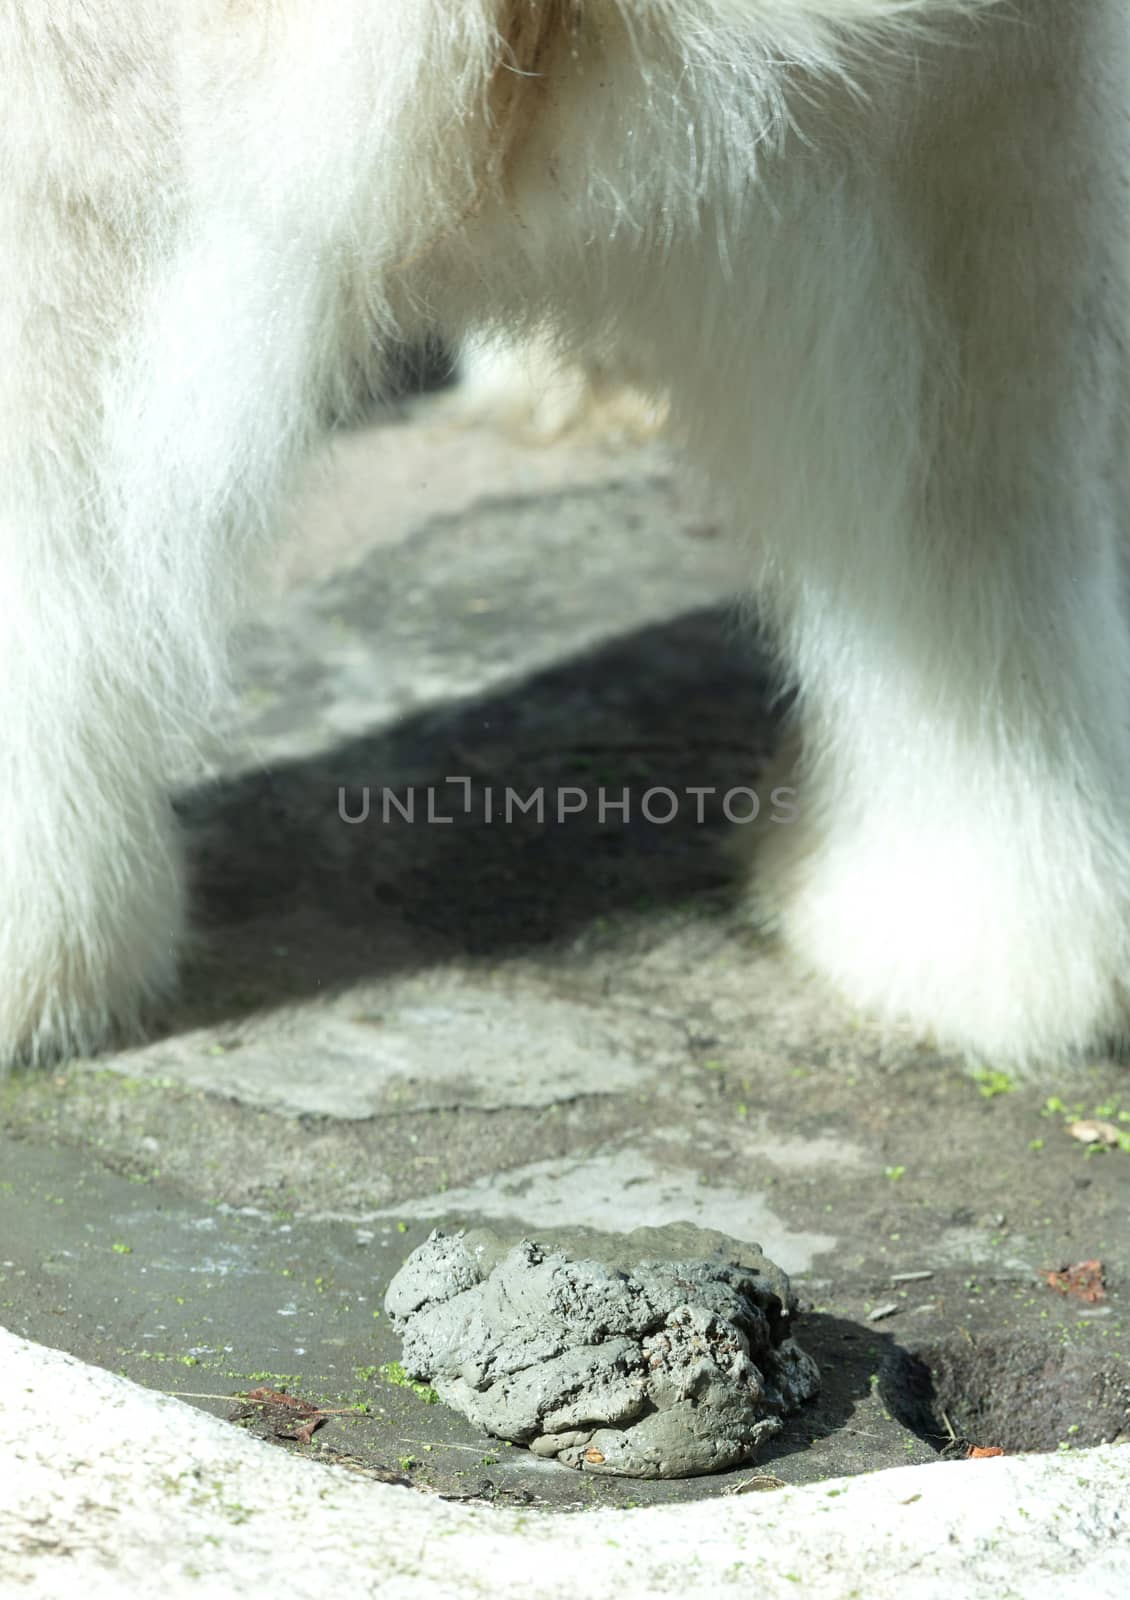 Polarbear pooing, selective focus on the poo